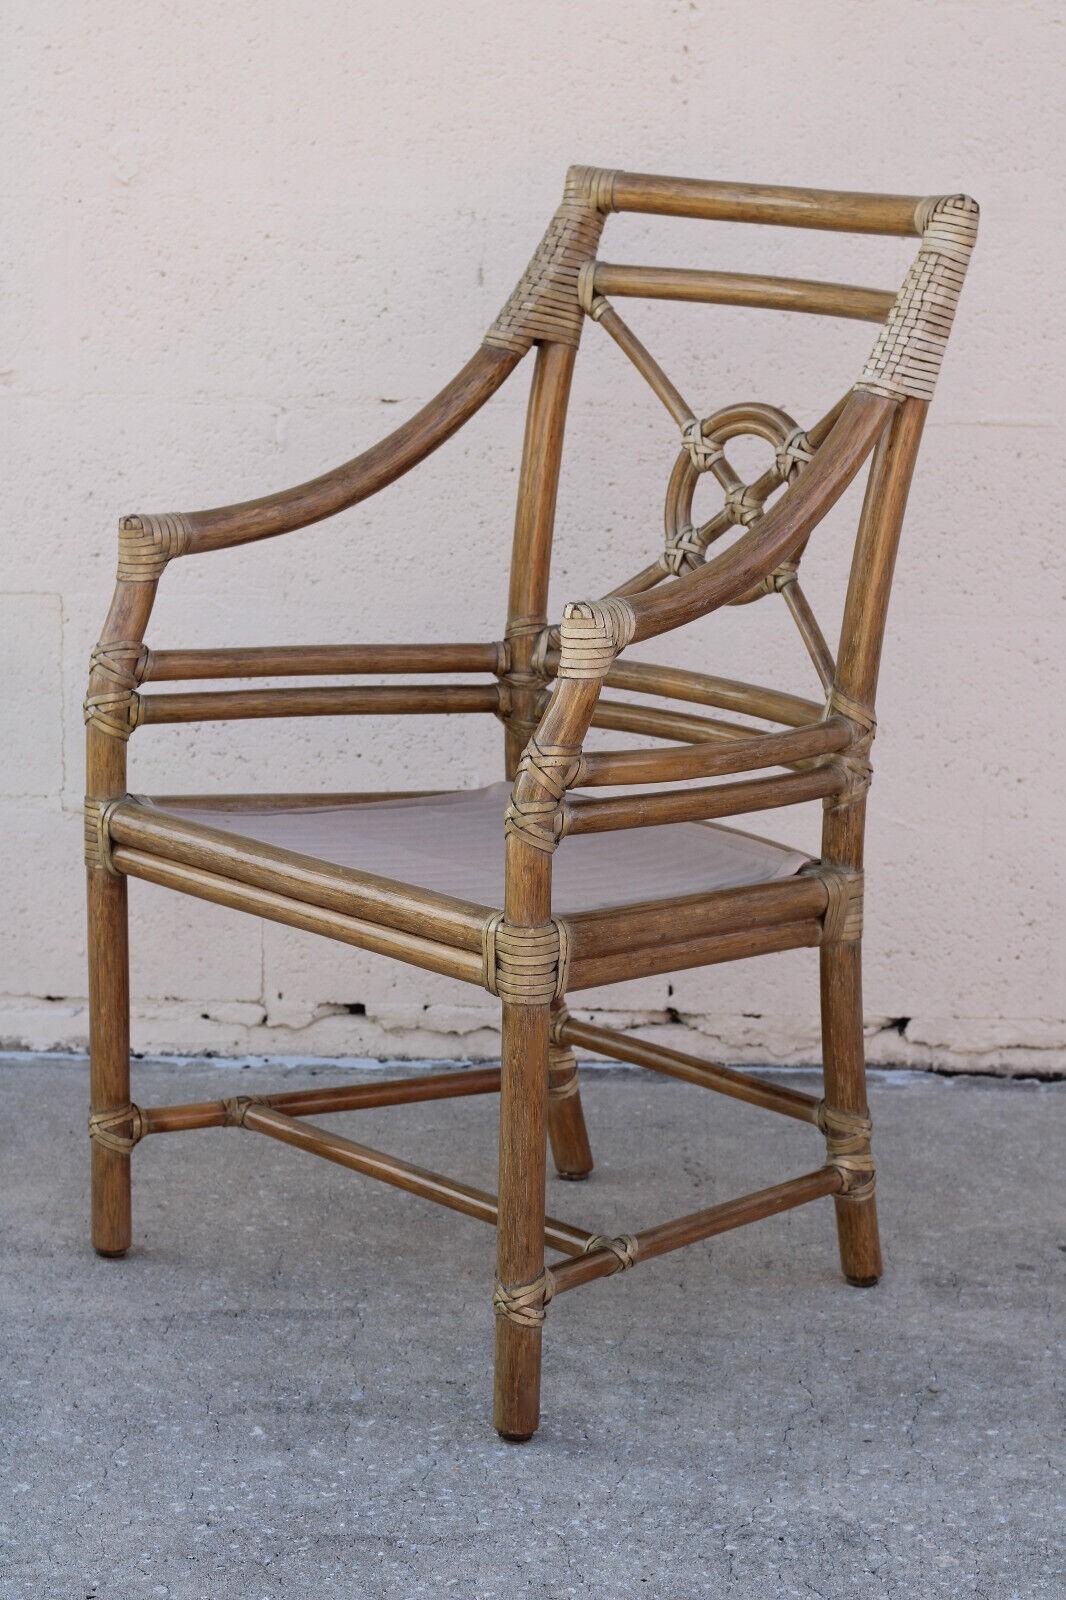 Elinor McGuire Rattan Target Arm Chairs or Dining Chairs, a Pair In Good Condition For Sale In Vero Beach, FL